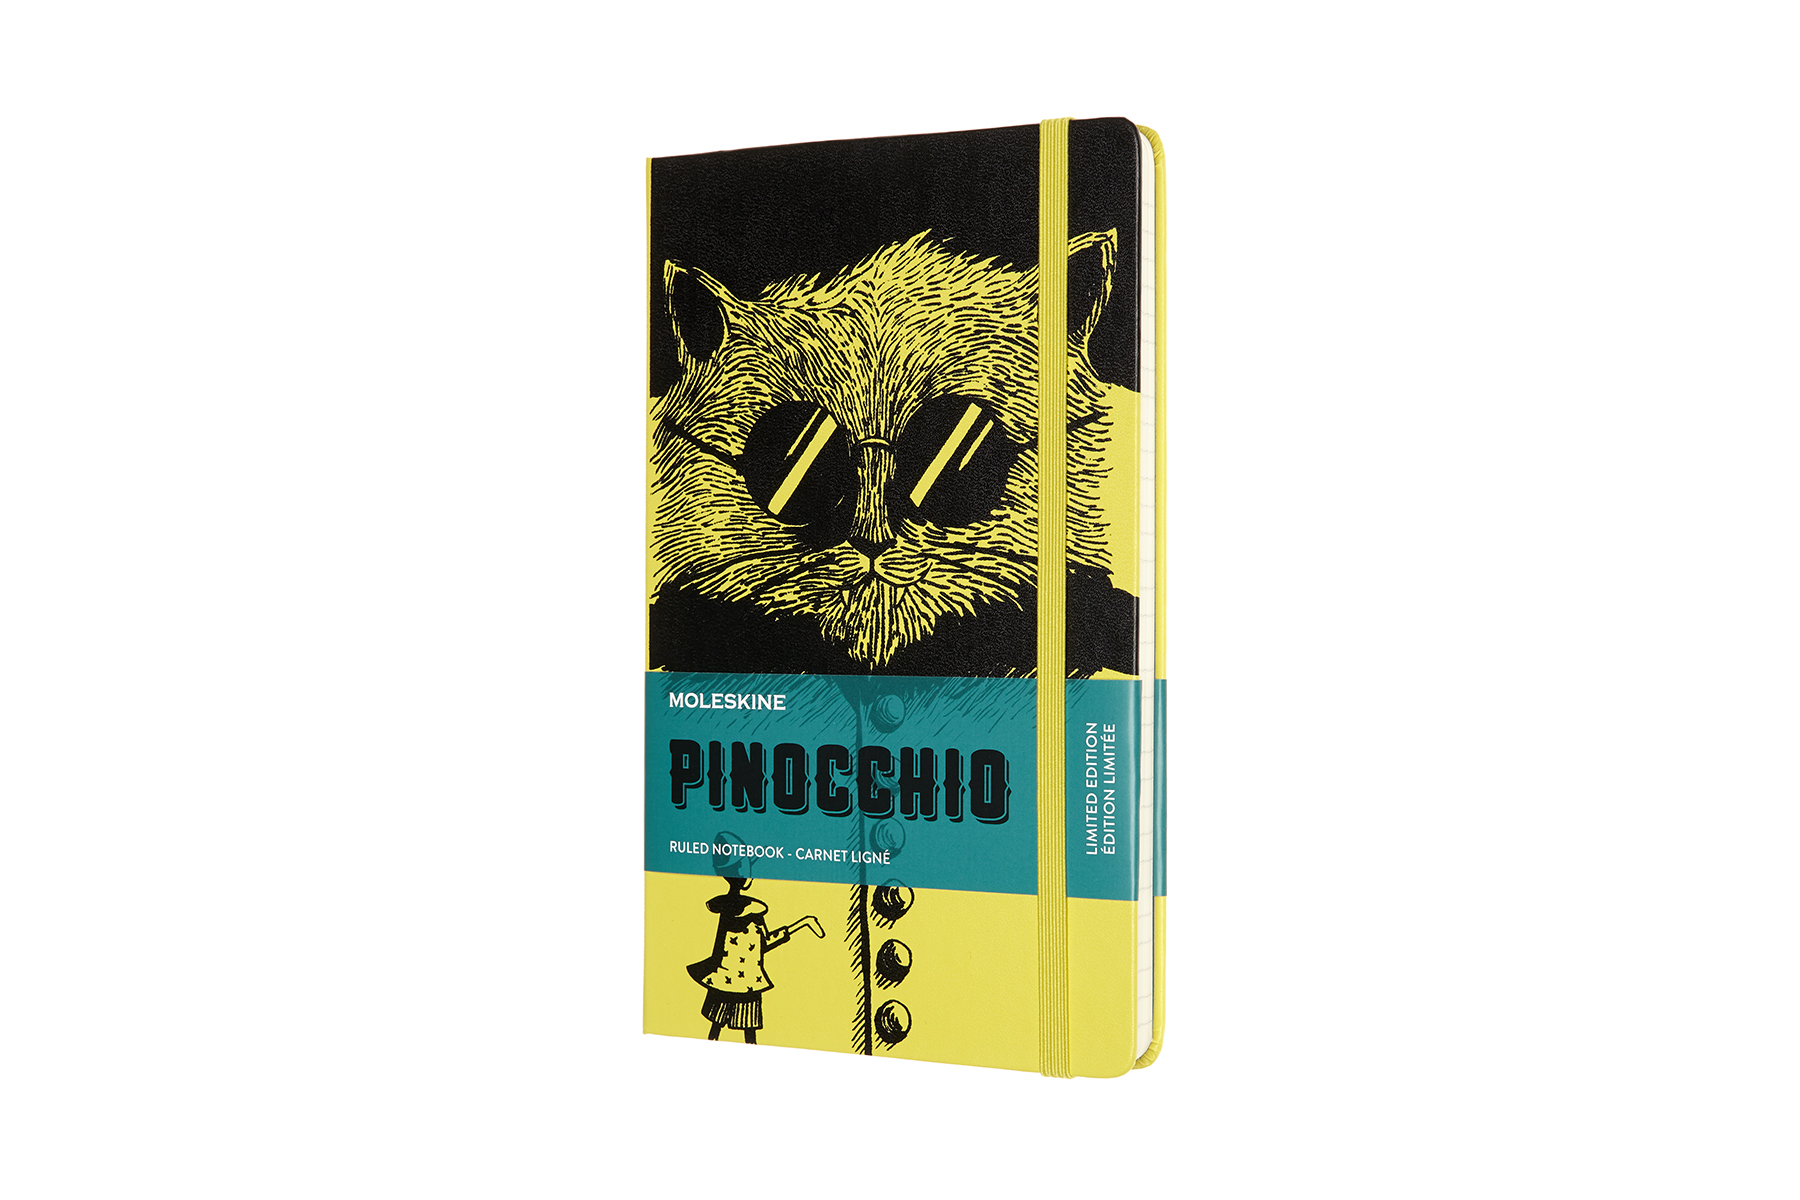 Moleskine Limited Edition Pinocchio Notebook Ruled Hardcover Large The Cat